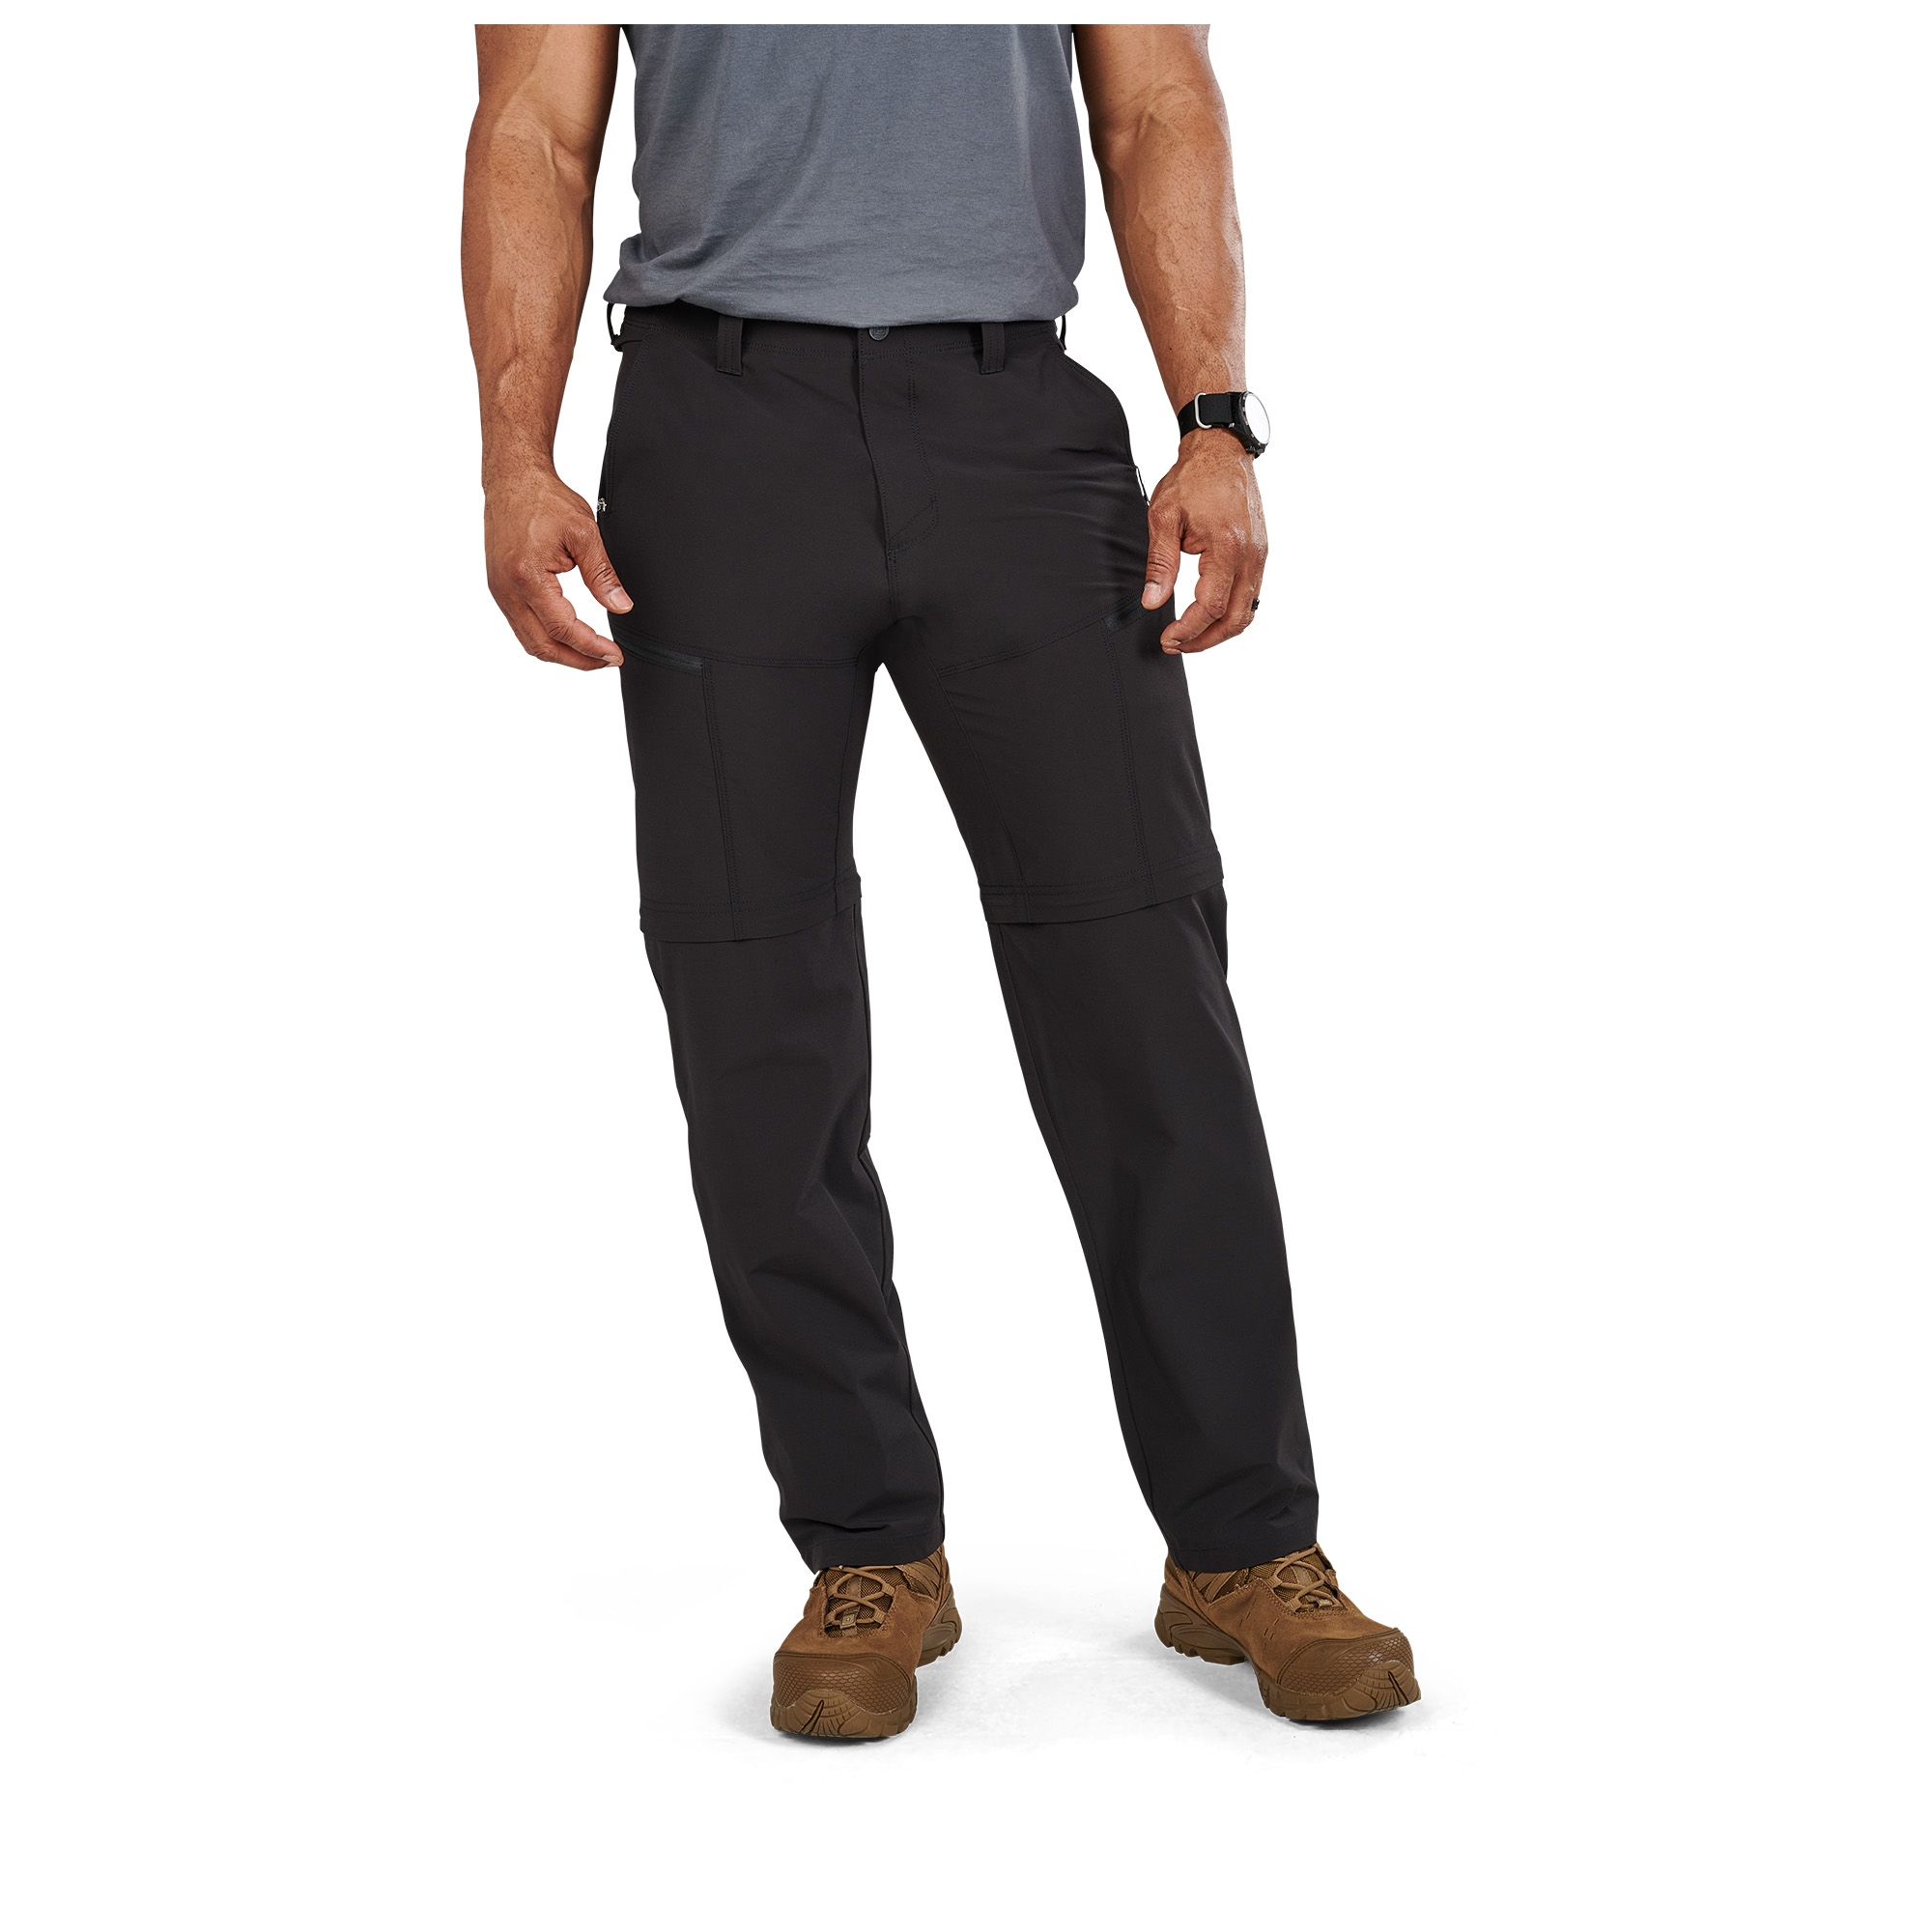 Carry a concealed weapon? 5.11 Tactical has pants for your pistol – Orange  County Register